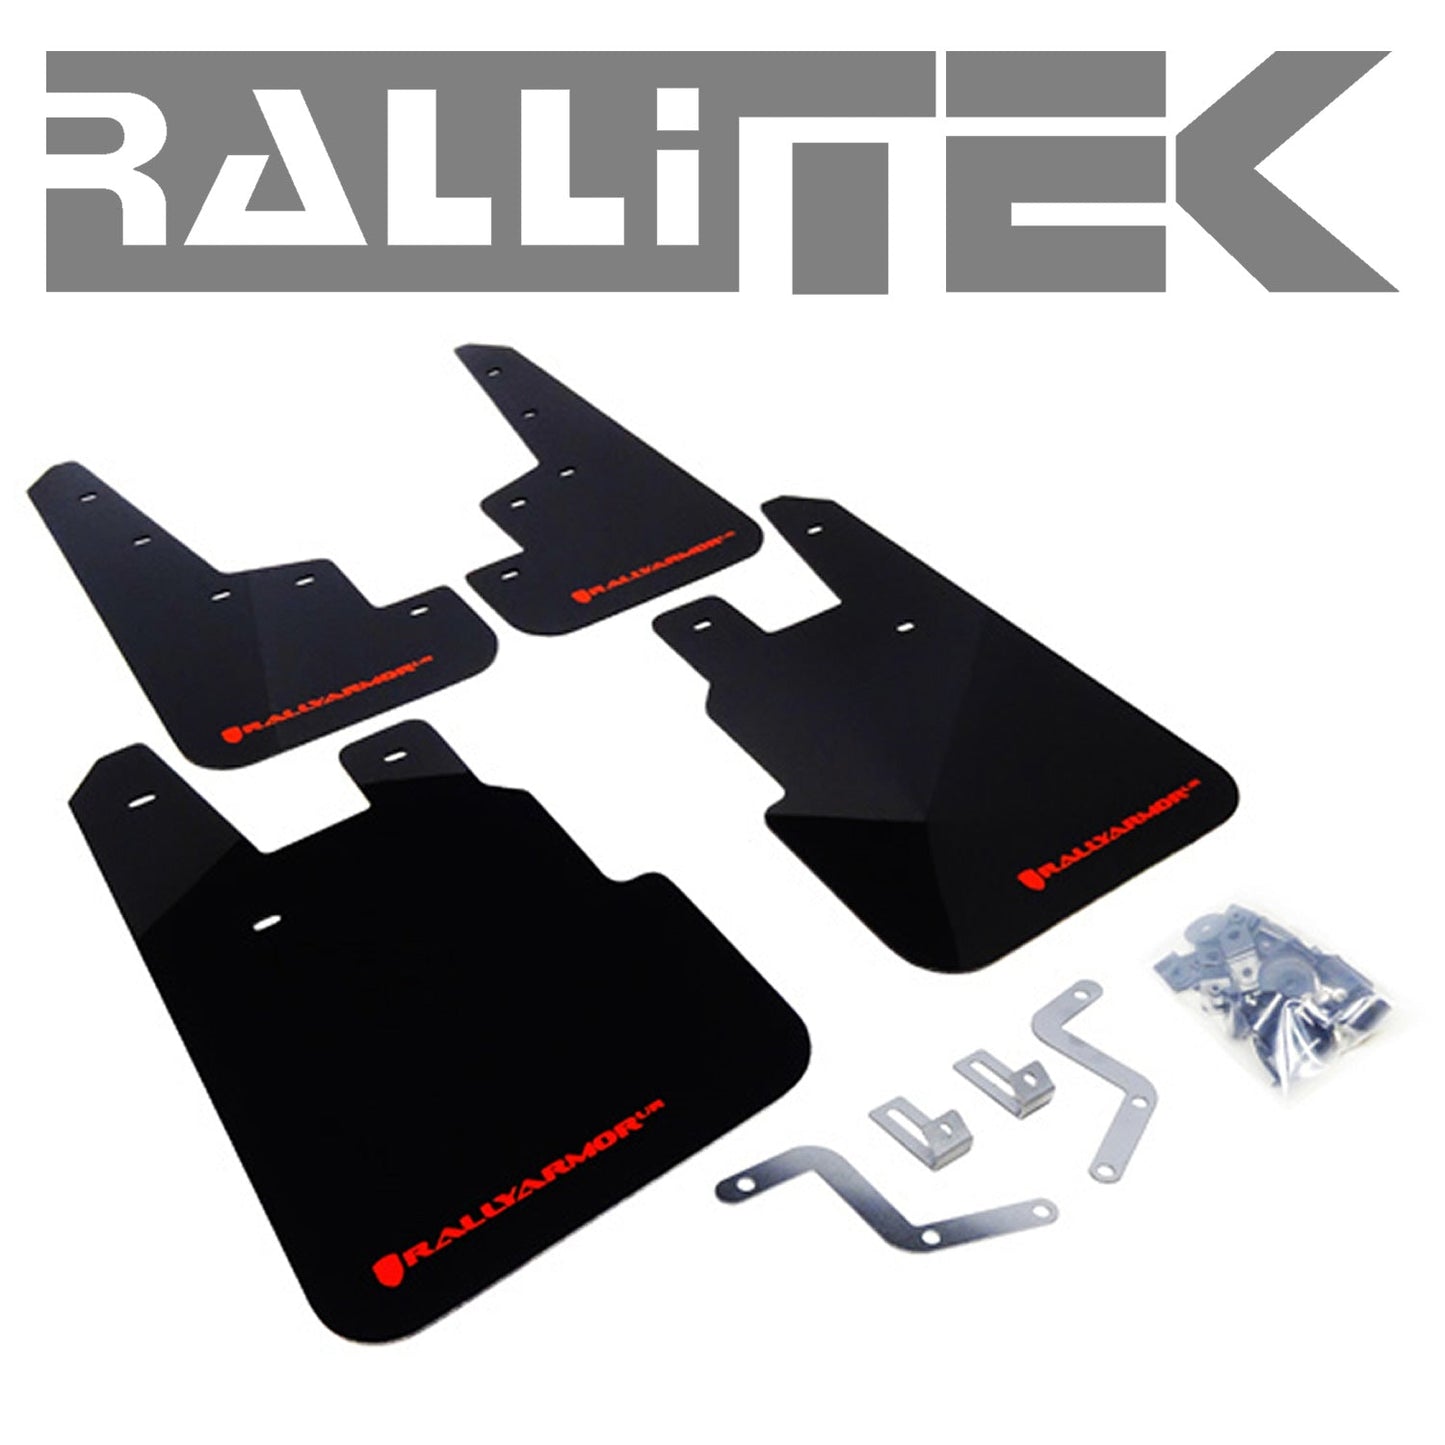 Rally Armor UR Mud Flaps - Forester 2014-2015